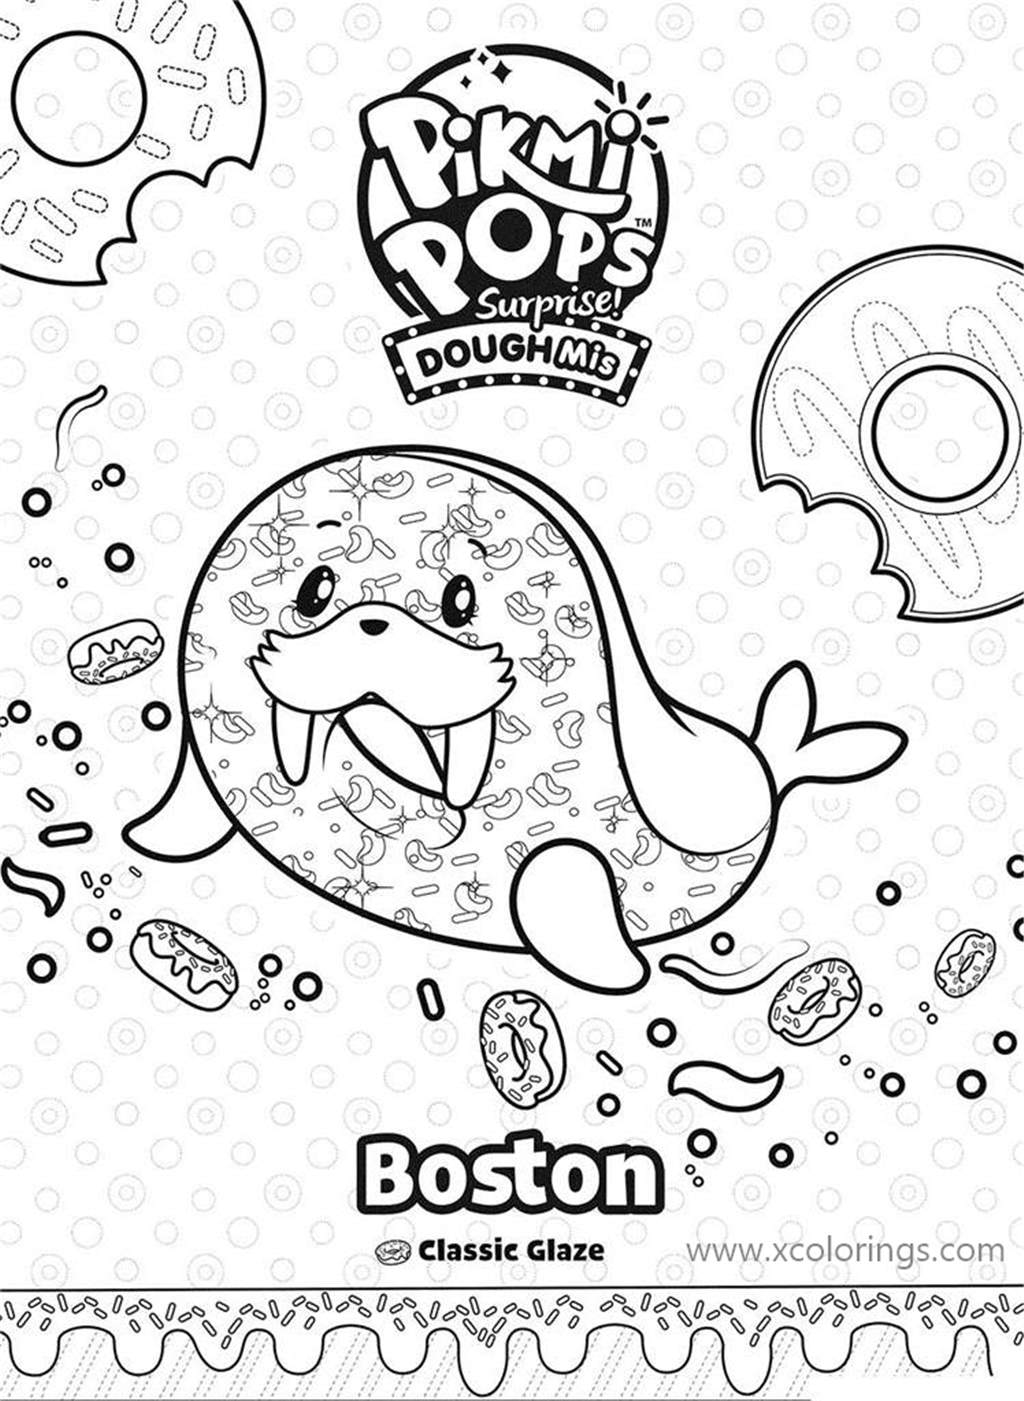 Free Pikmi Pops Coloring Pages Boston printable